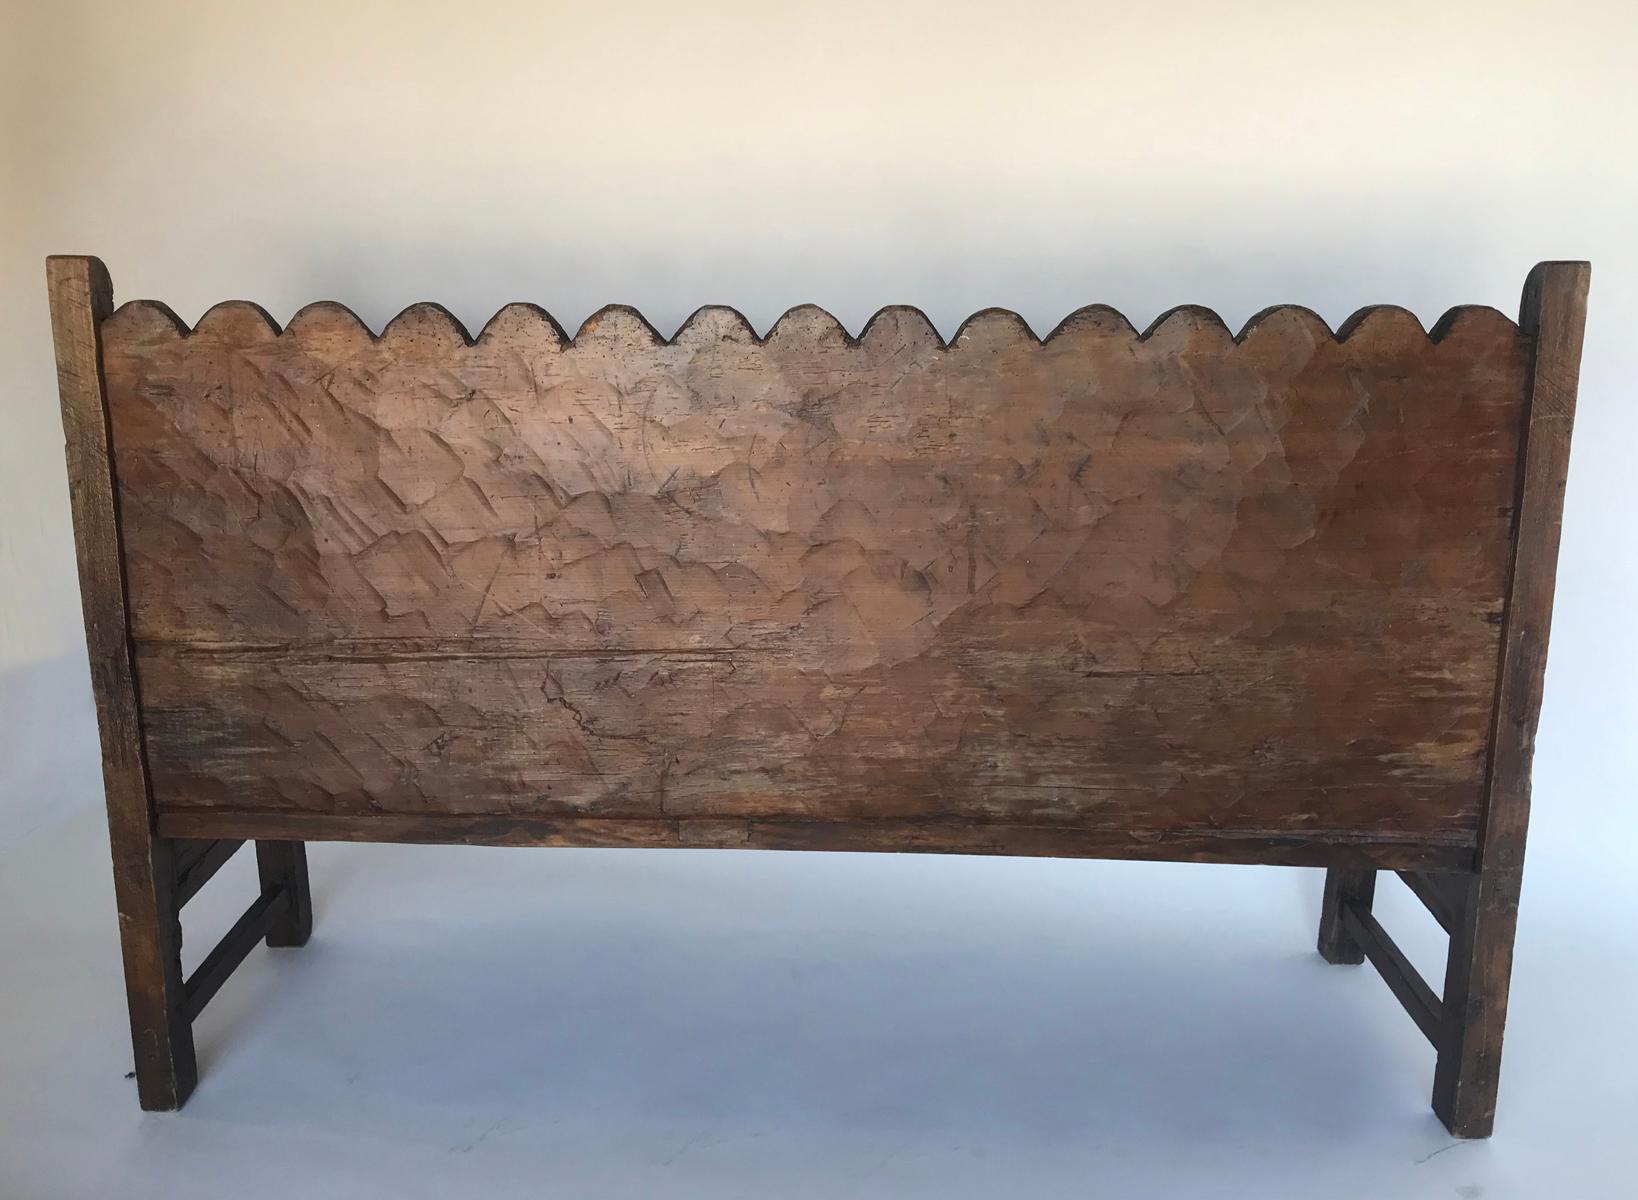 Hand-Carved Rustic Chajul Bench With Tall Scalloped Back